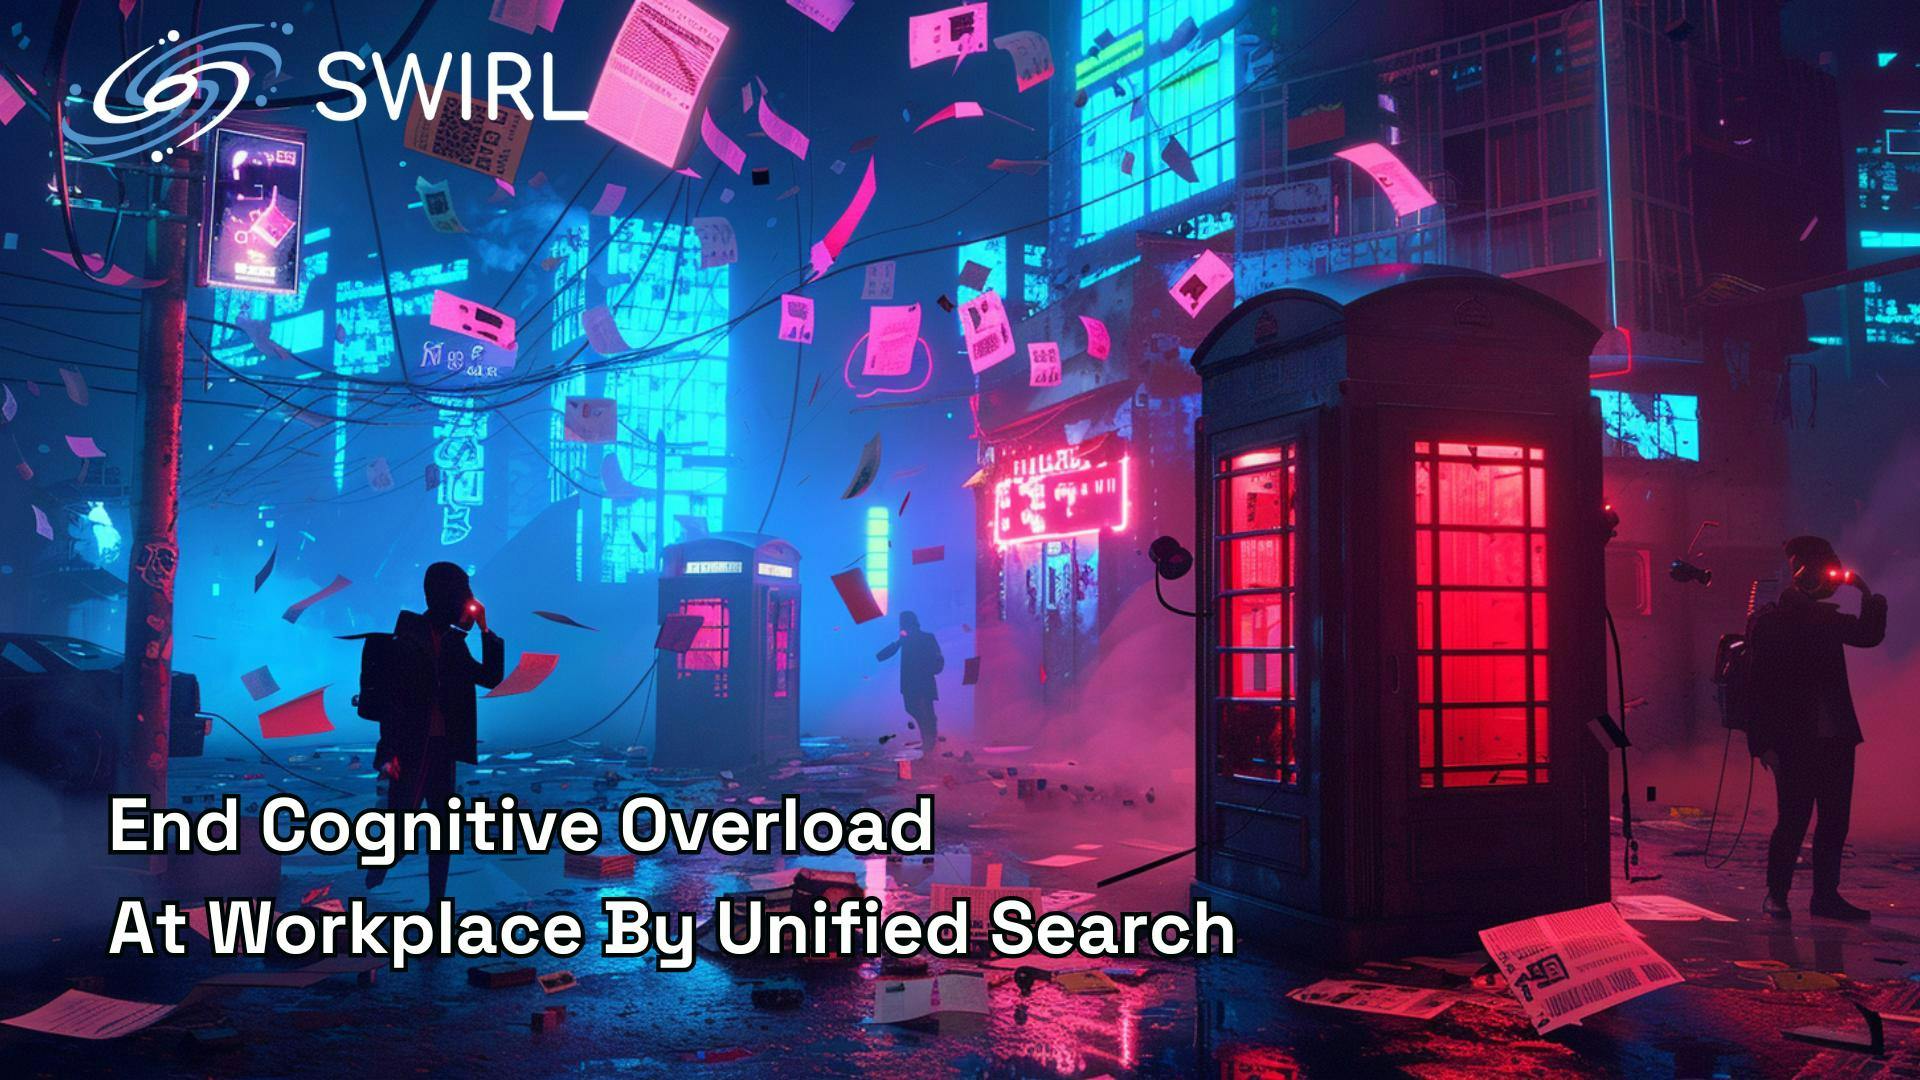 End Cognitive Overload At Workplace With Unified Search